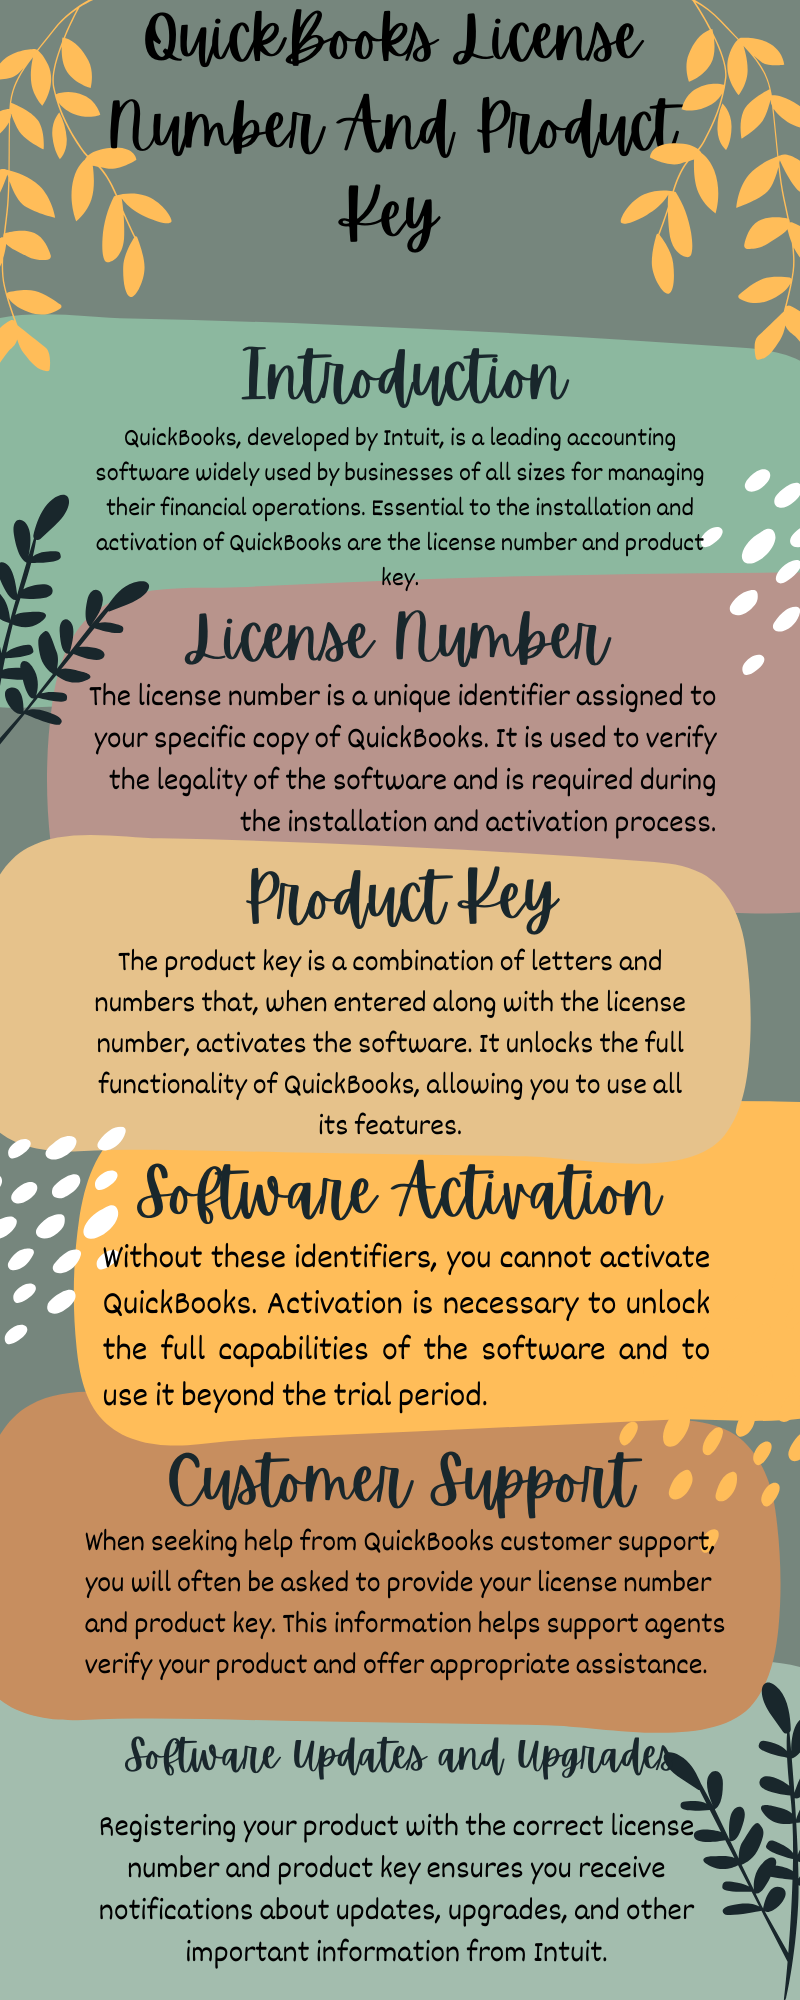 QuickBooks License Number And Product Key